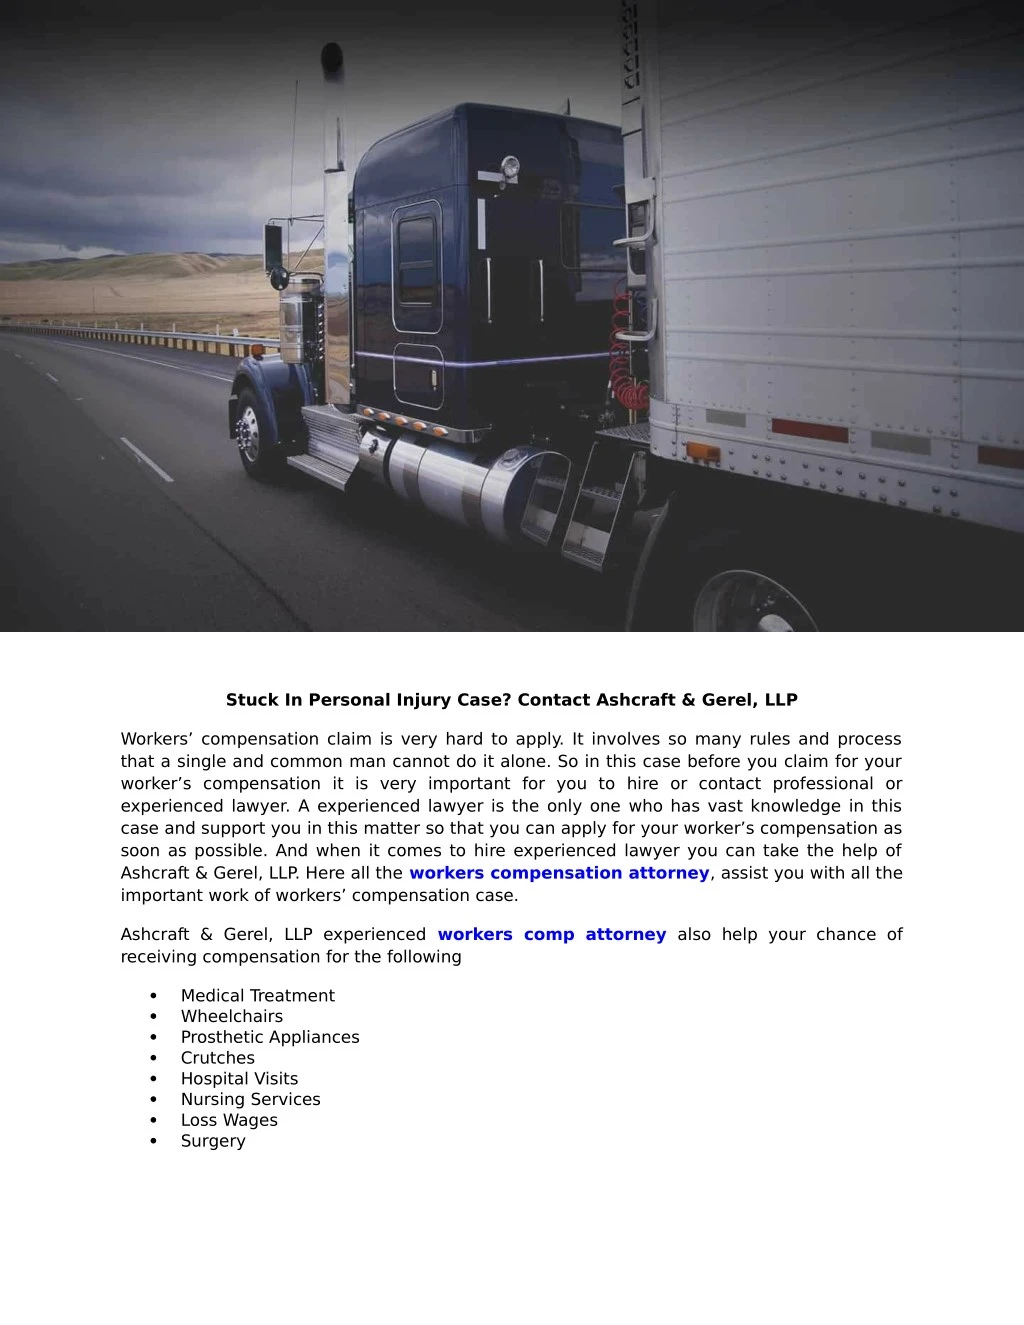 stuck in personal injury case contact ashcraft